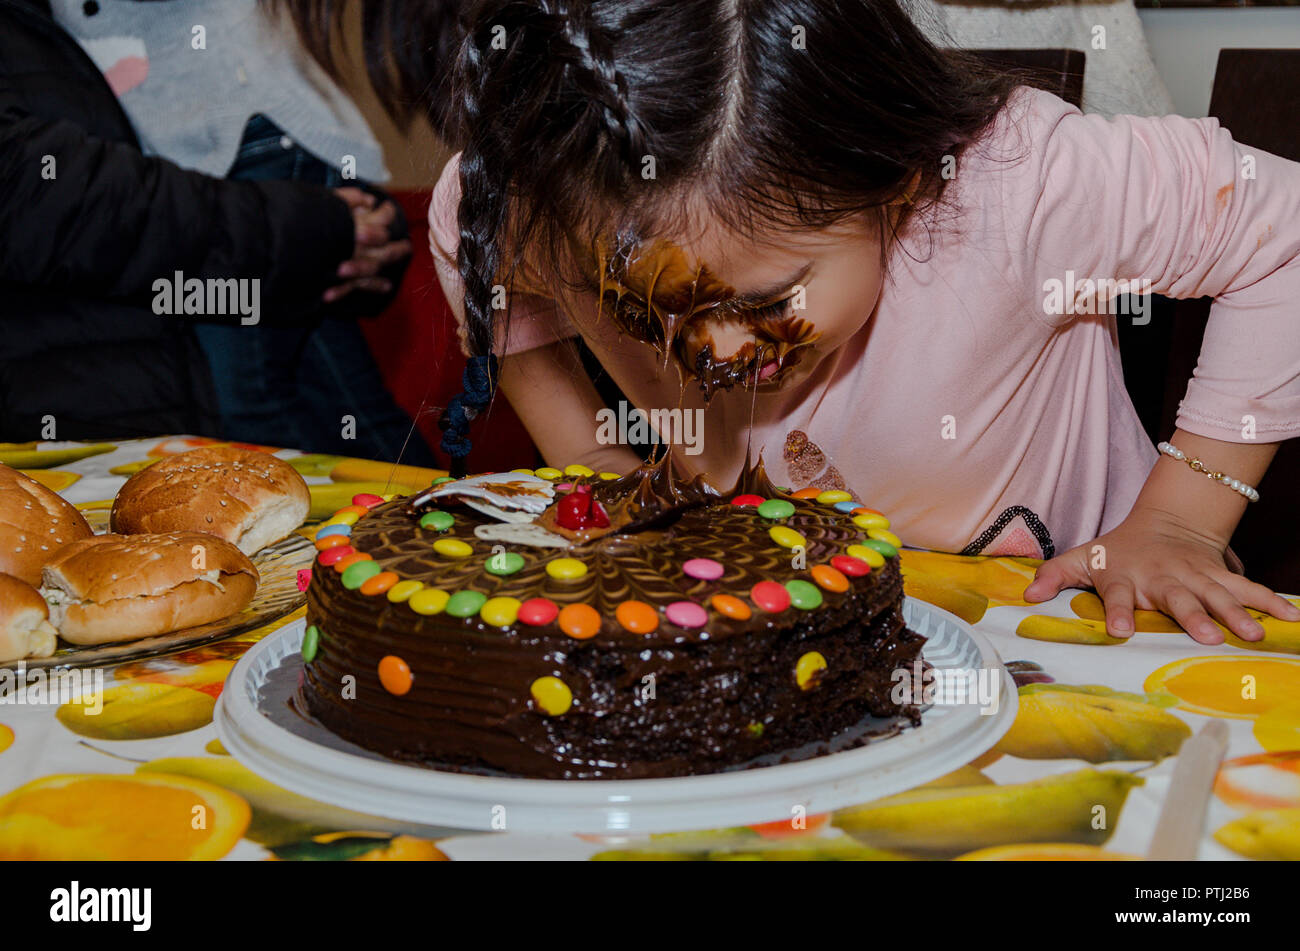 6 year old girl celebrating her birthday by putting her face inside the chocolate cake Stock Photo